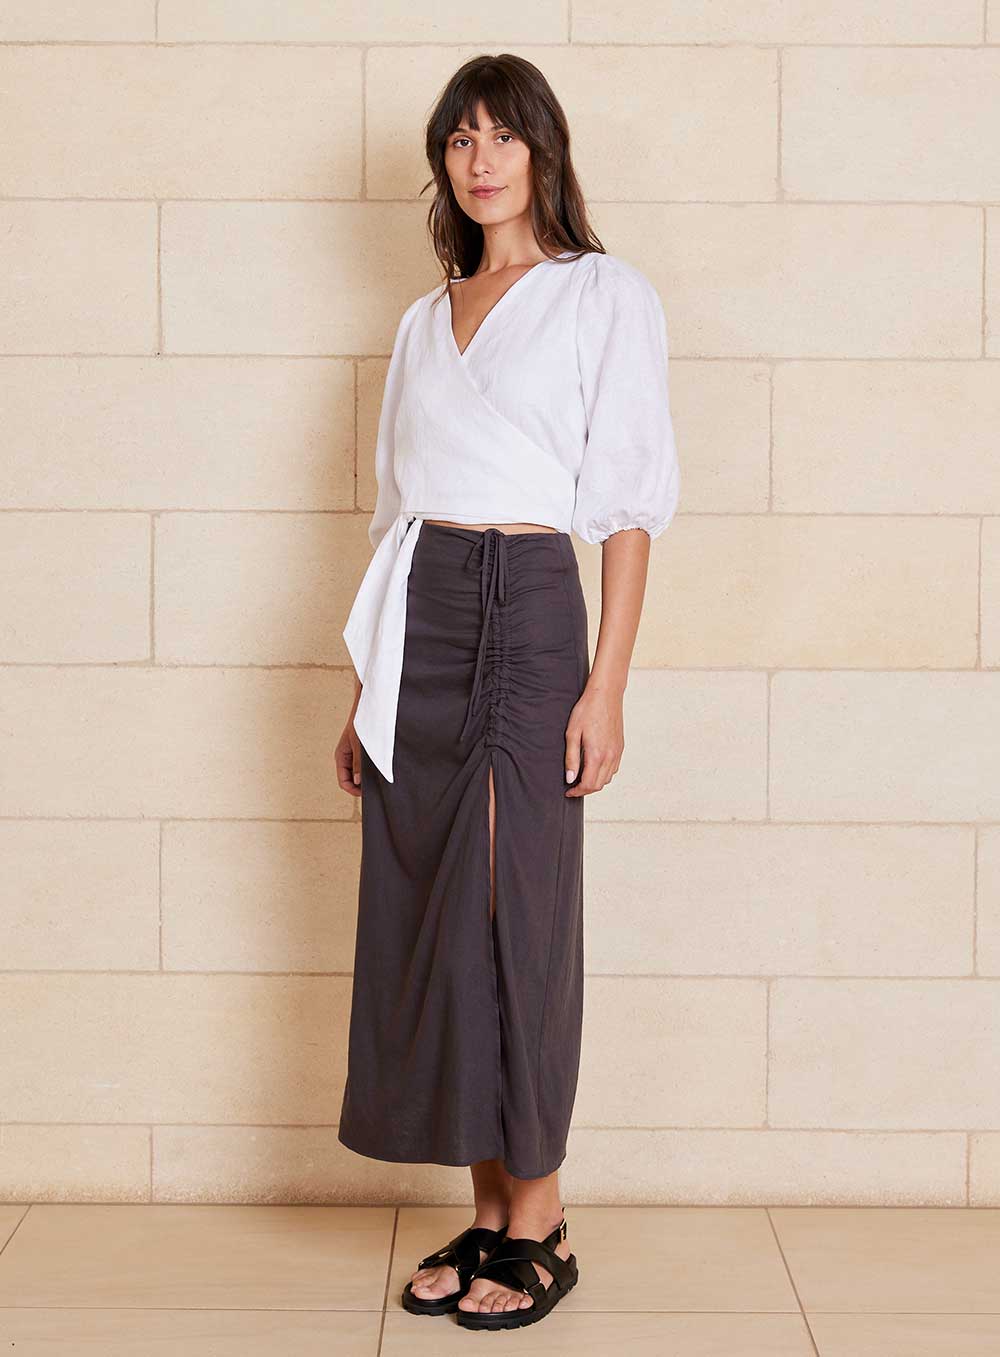 The Lily Skirt in charcoal features a ruched split detailing that adds both shape and texture, functional ruching with tie leg splits and invisible zip back seam.